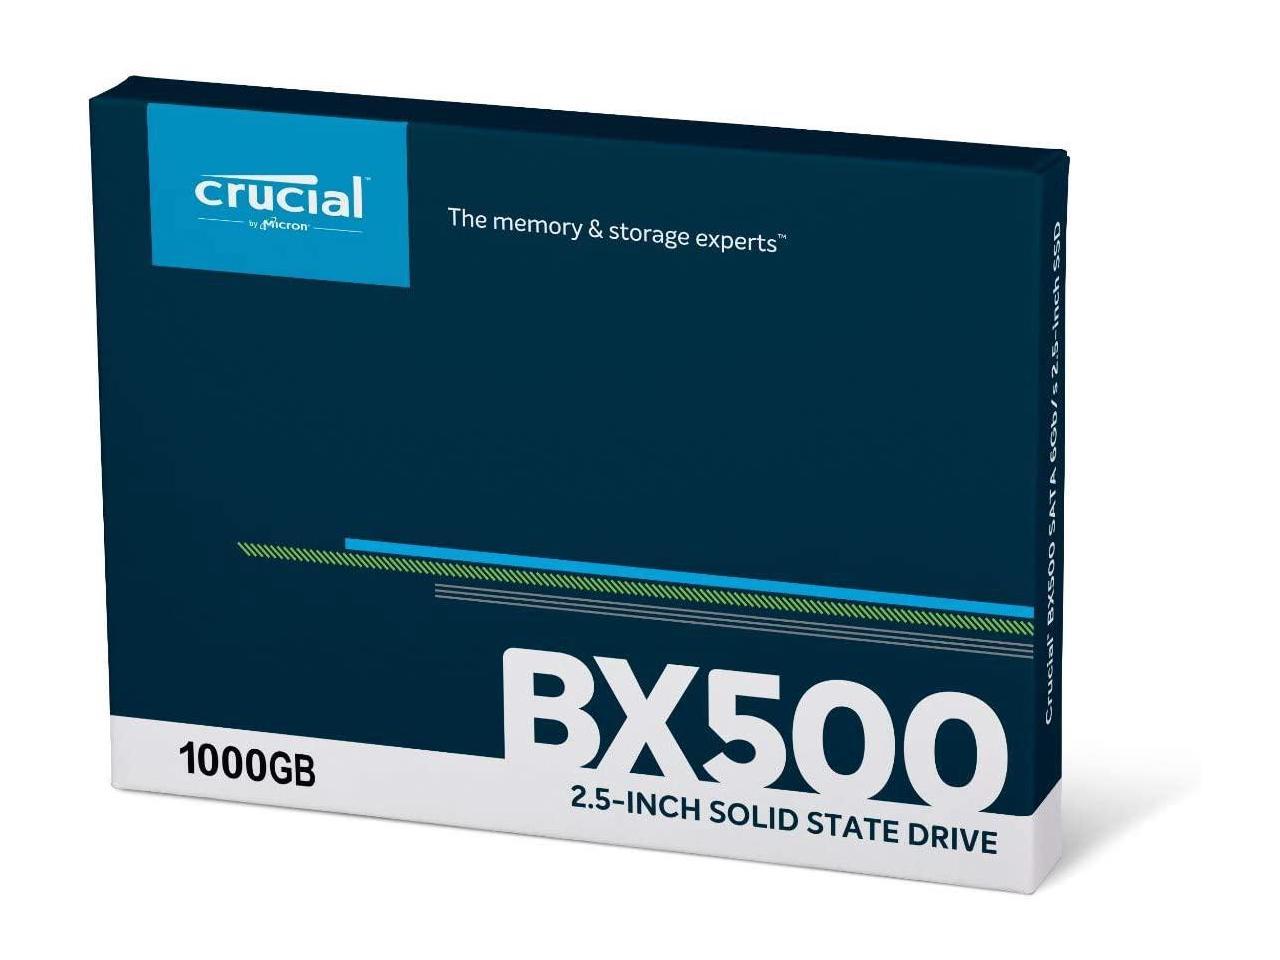 Crucial CT1000BX500SSD1 SSD Interne BX500 1 To, 3D NAND, SATA, 2,5 pouces